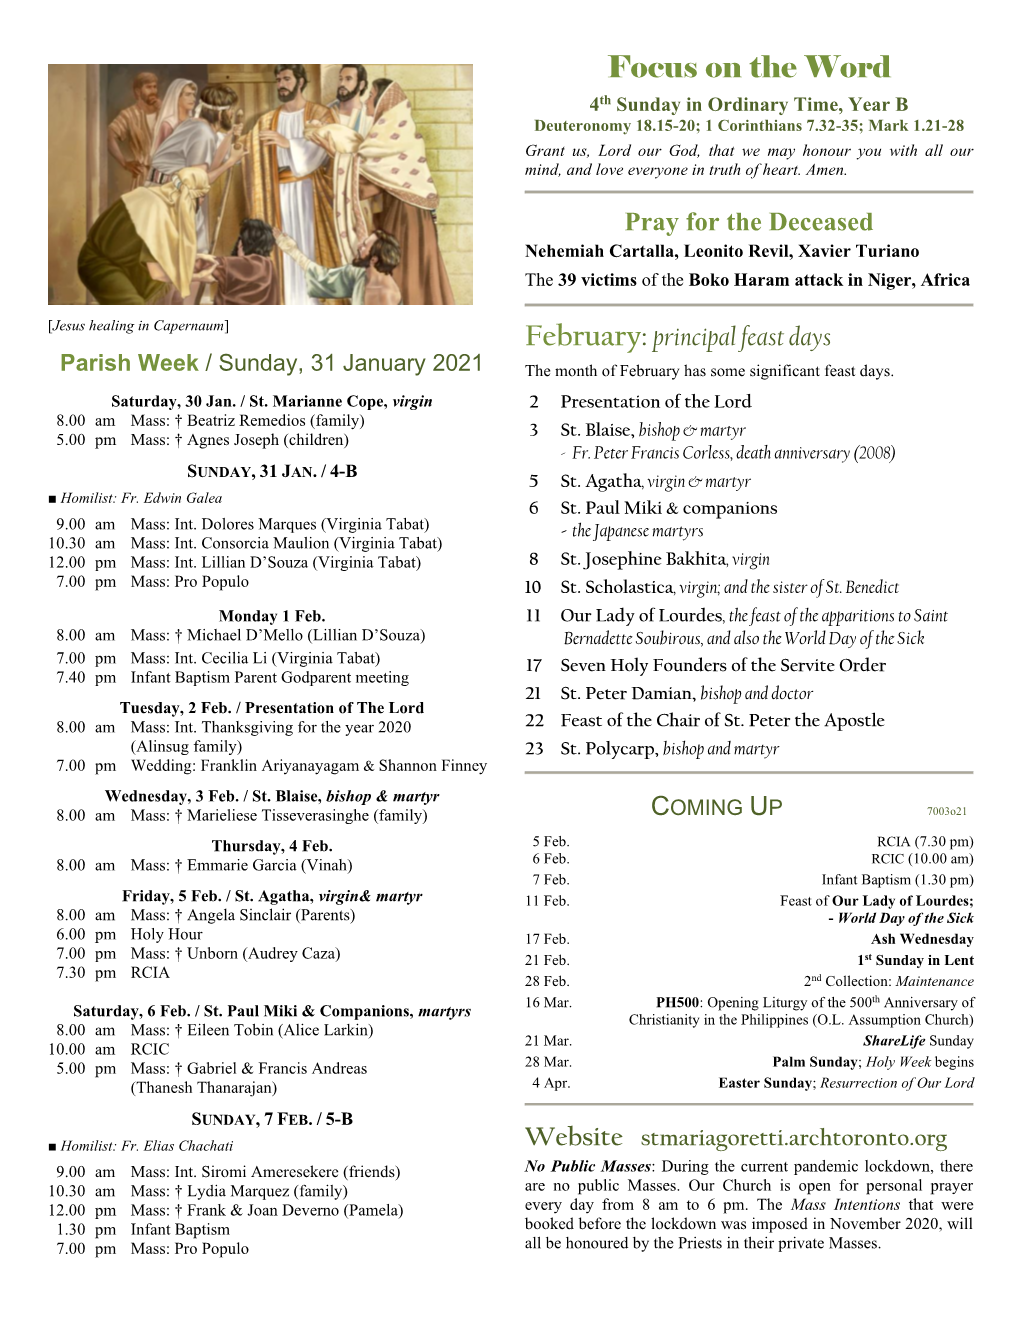 Parish Week / Sunday, 31 January 2021 the Month of February Has Some Significant Feast Days